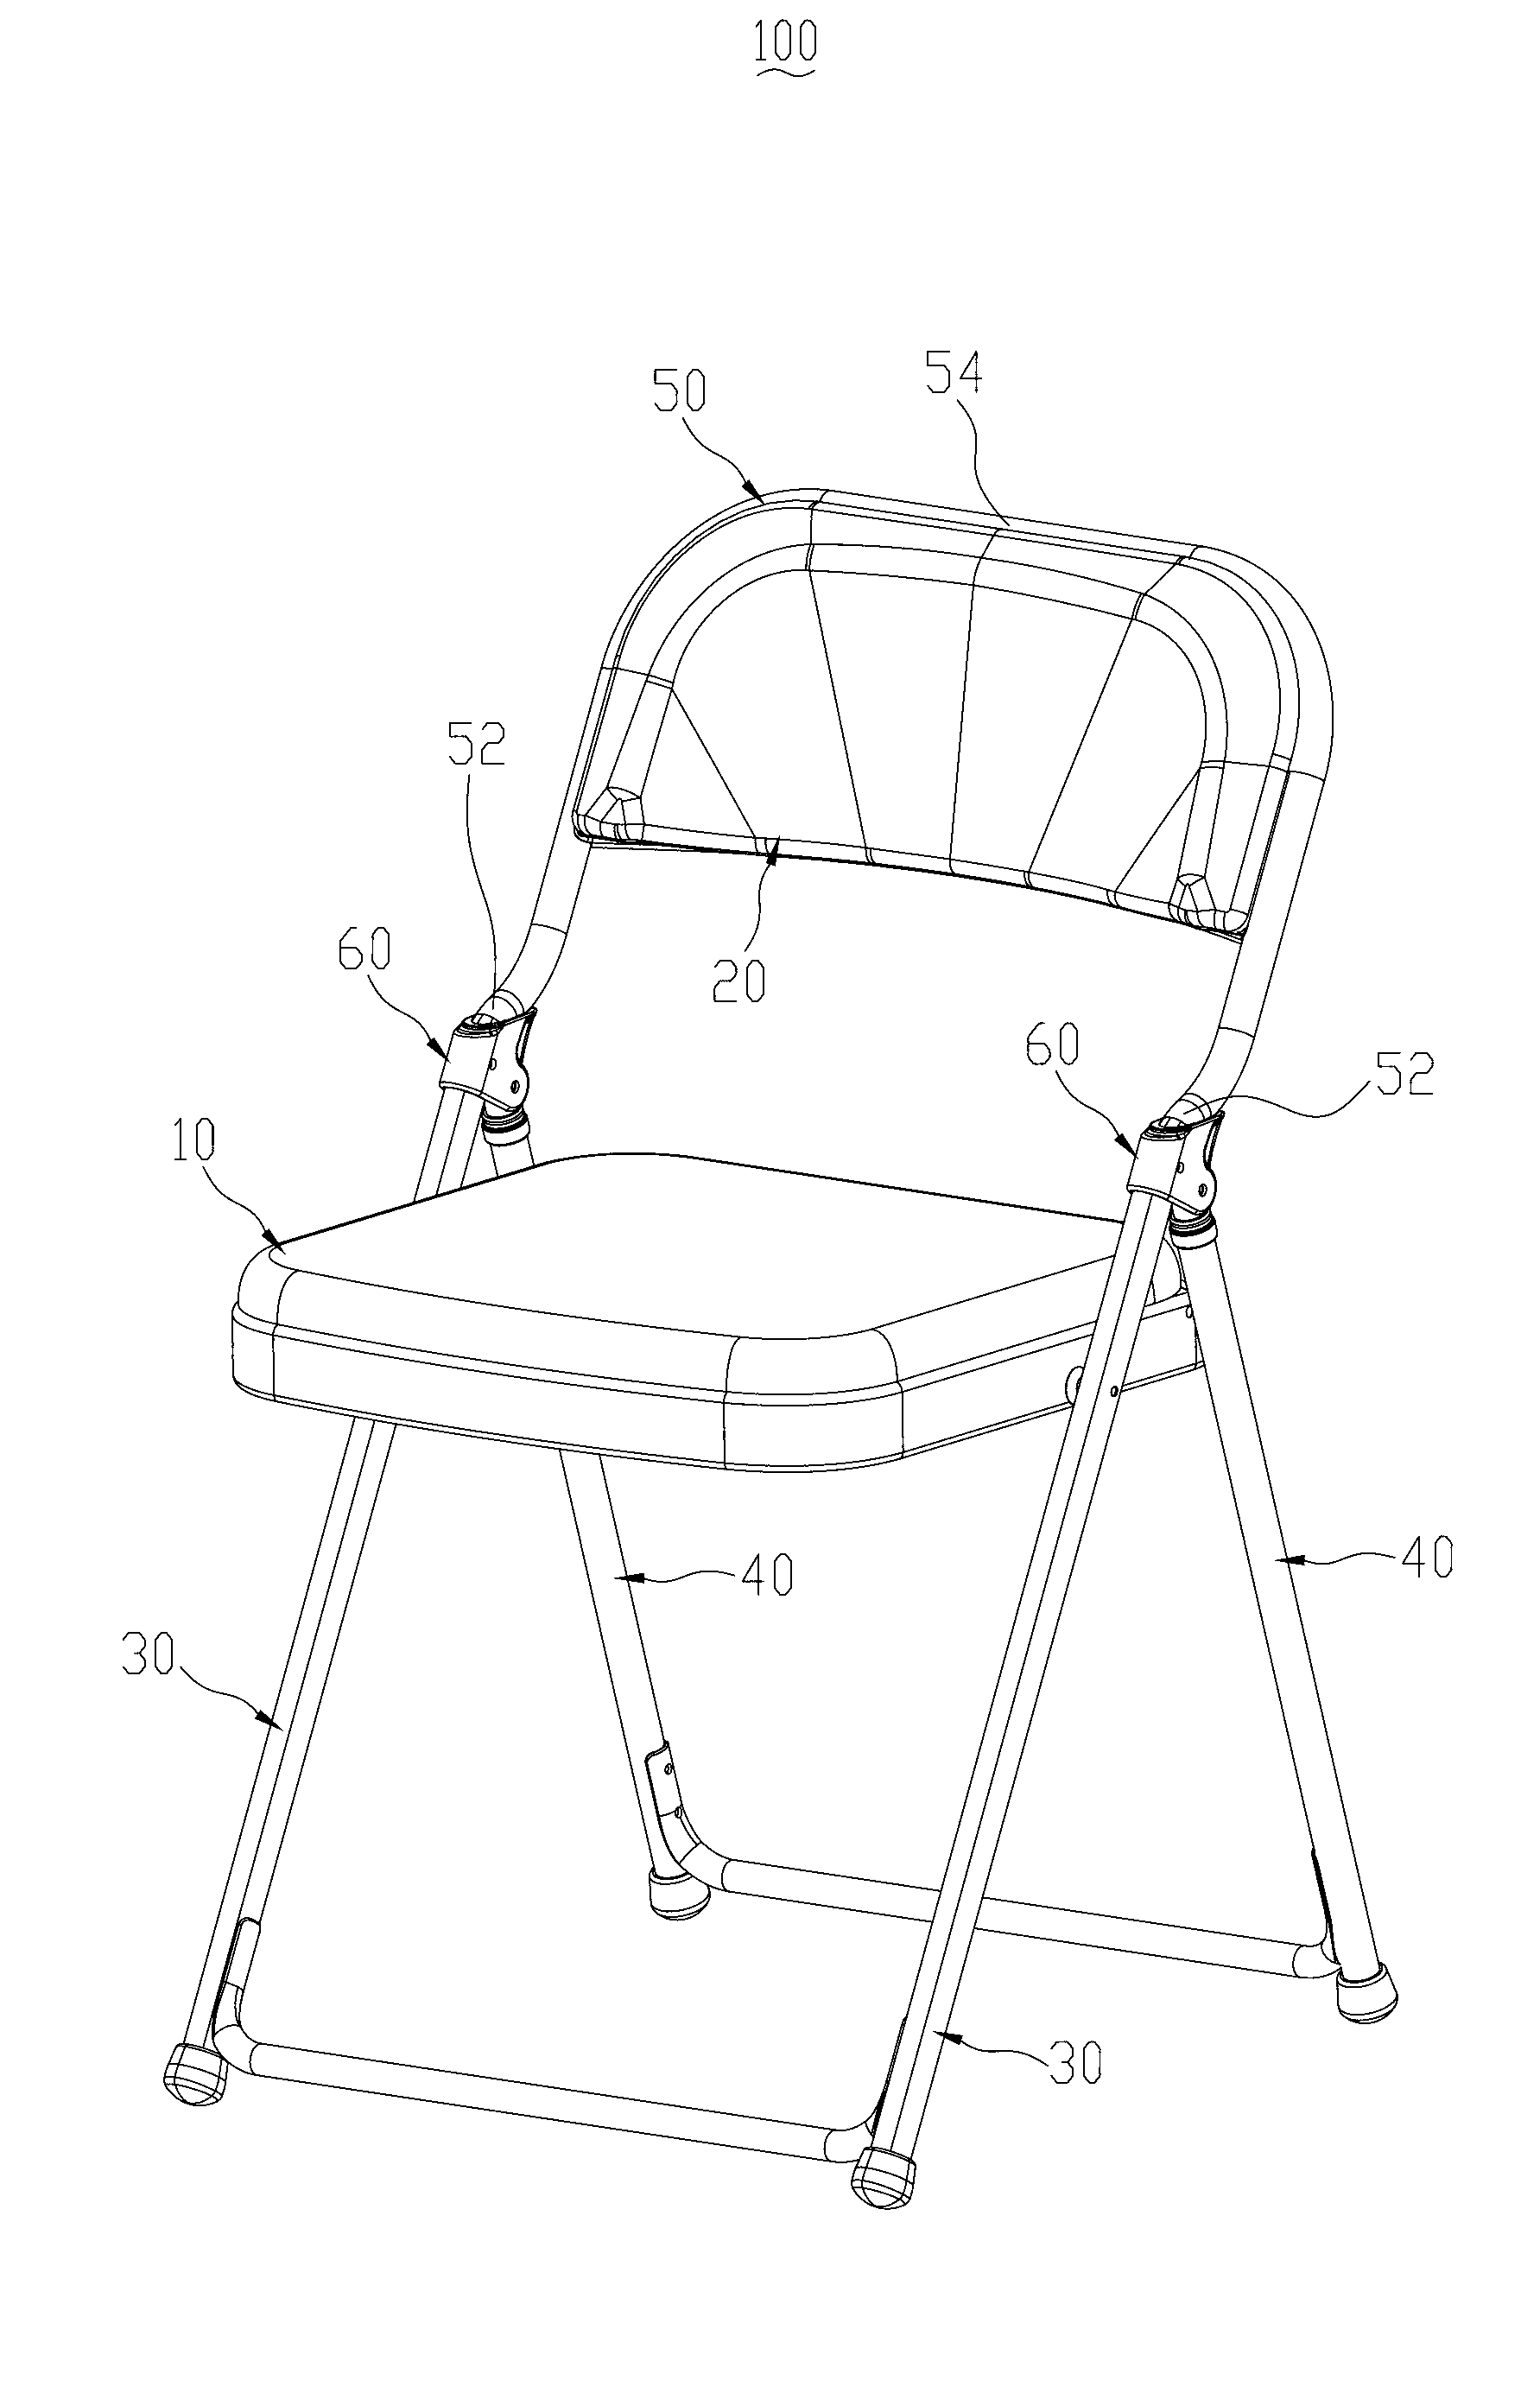 Foldable chair